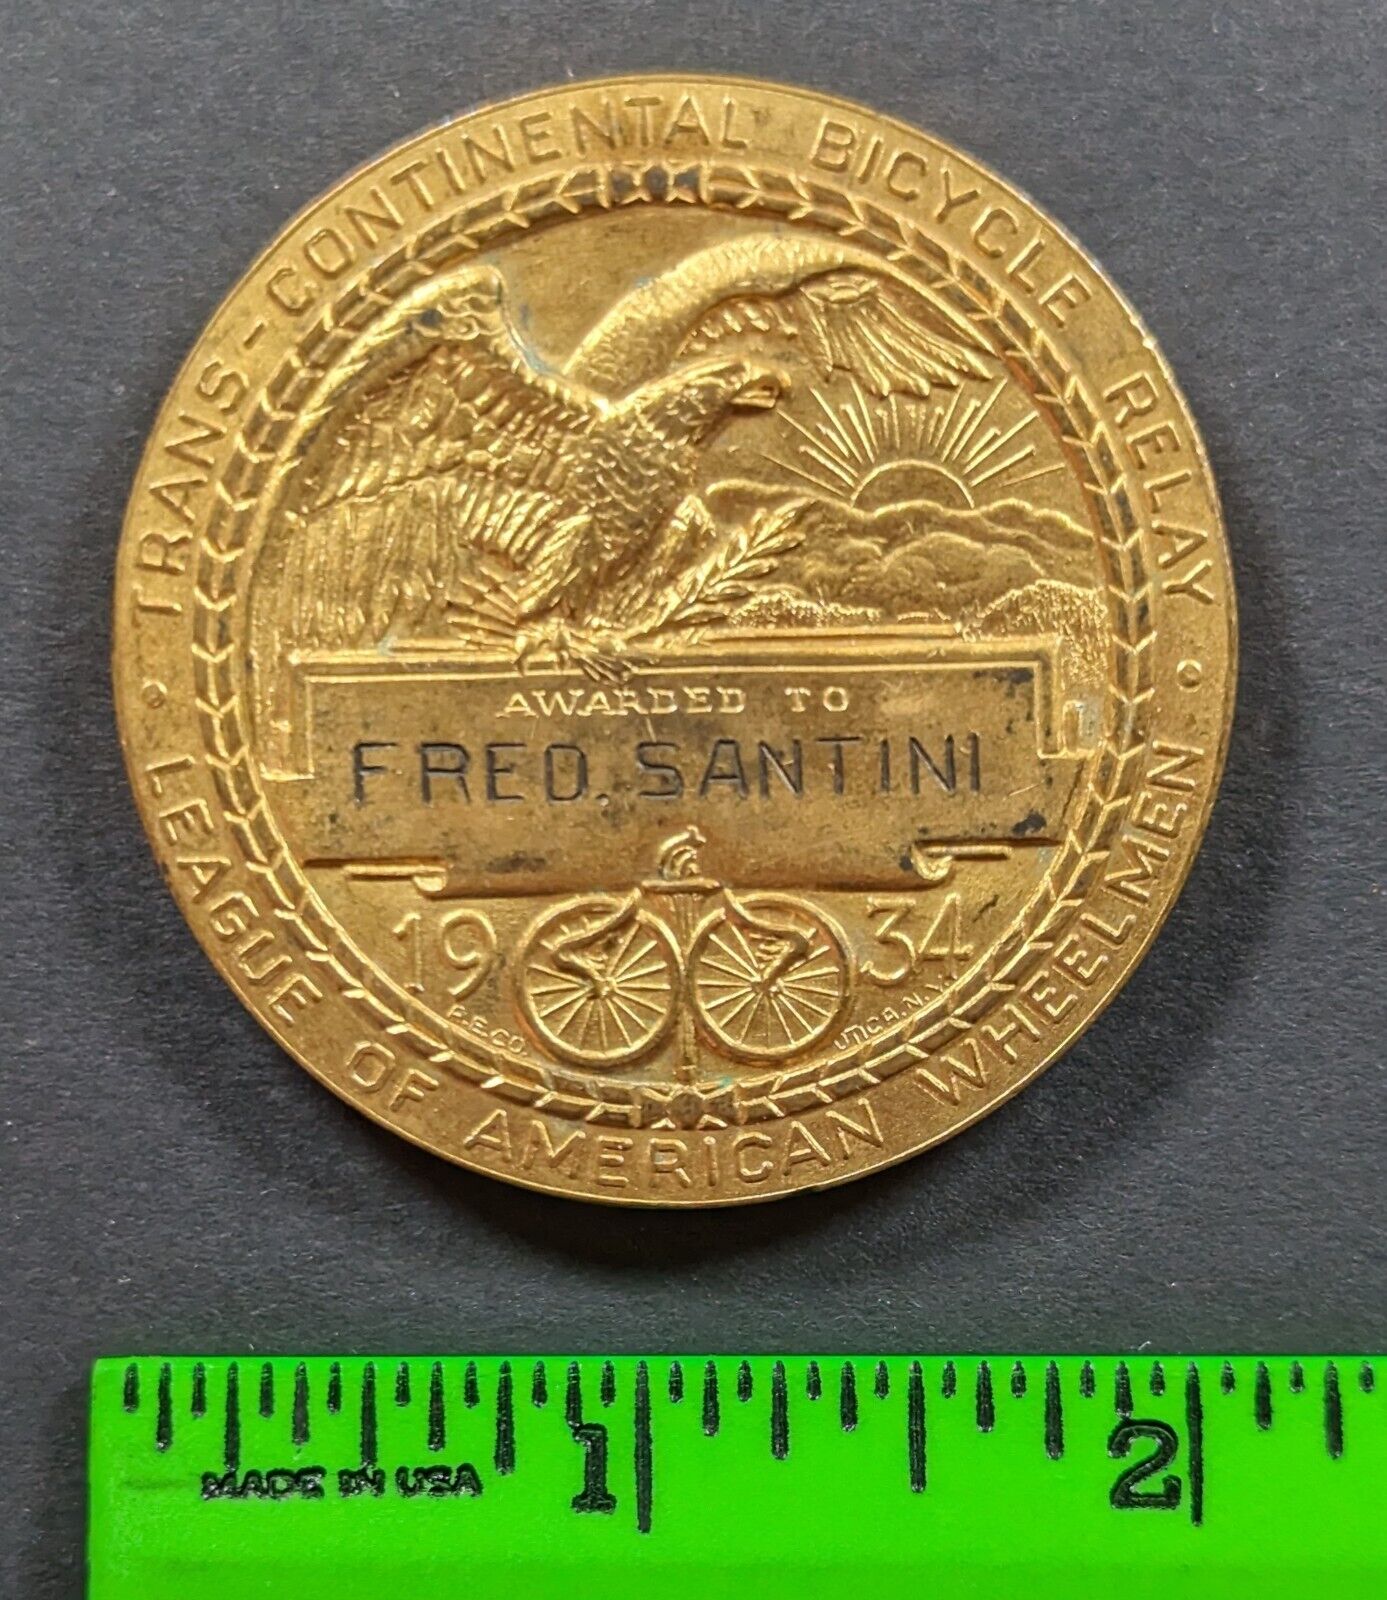 Vintage 1934 Transcontinental Bicycle Relay Atlantic to Pacific Metal Token